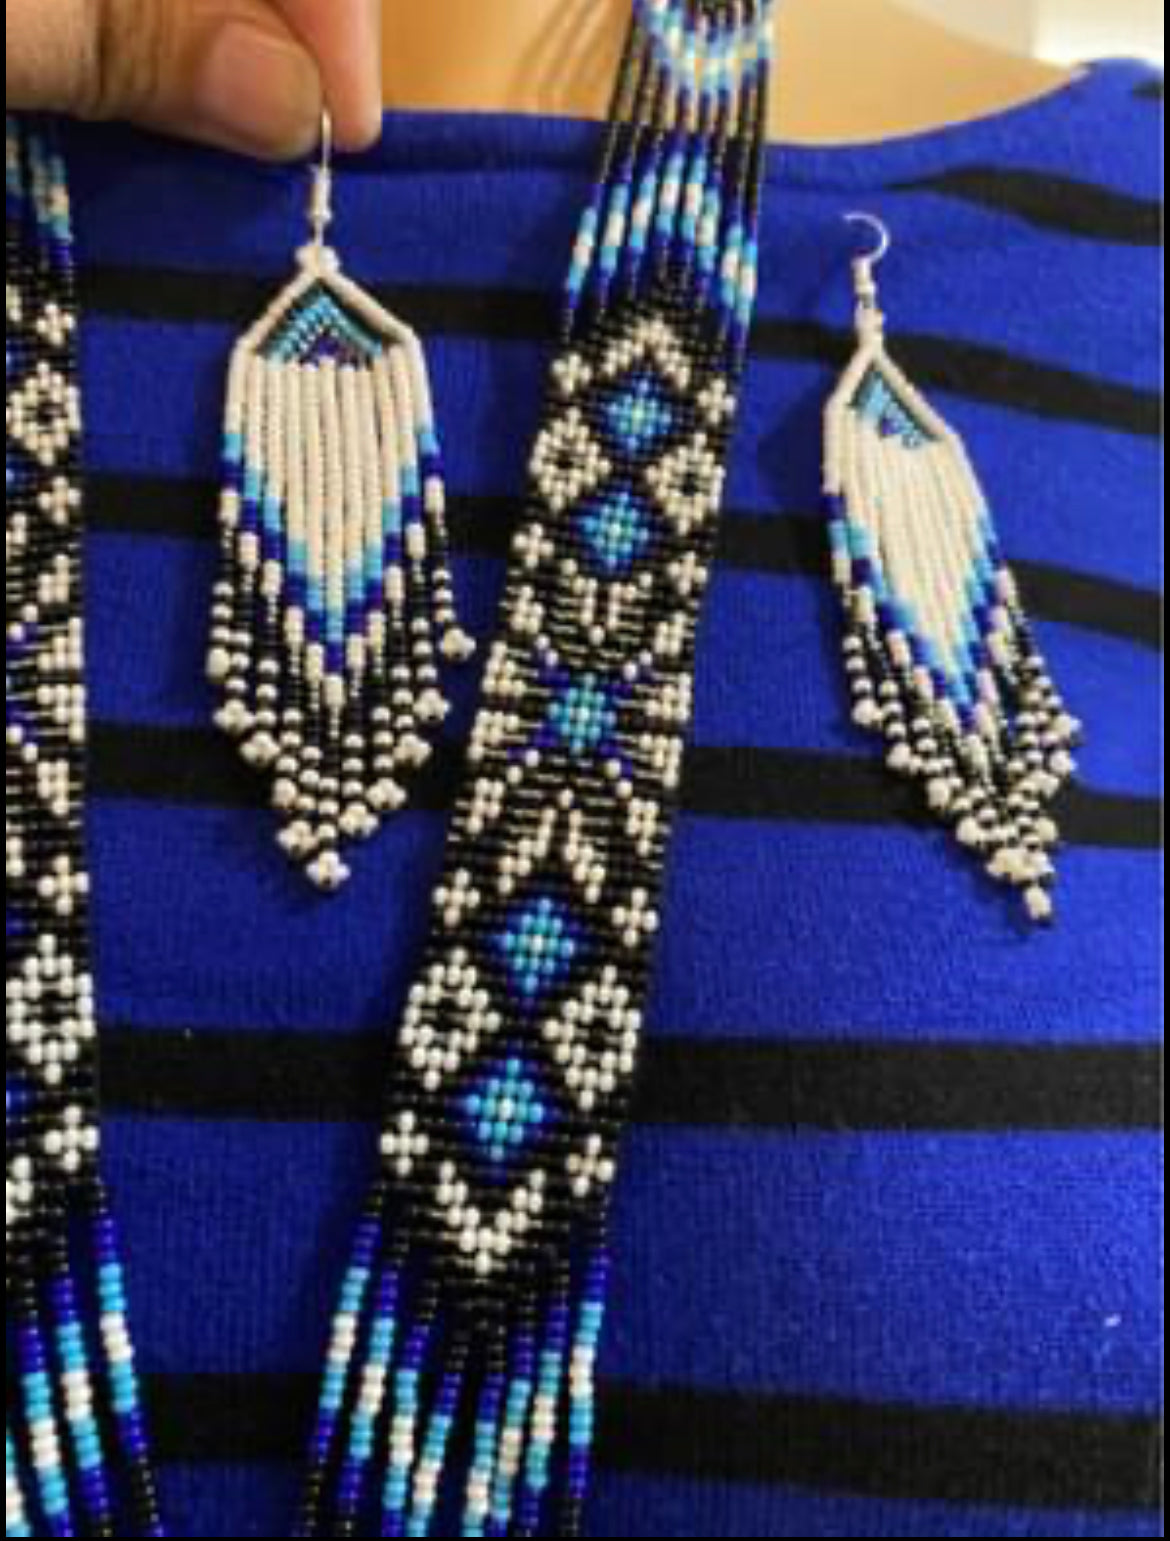 Handcrafted bead necklace earrings boho/African wedding jewelry set